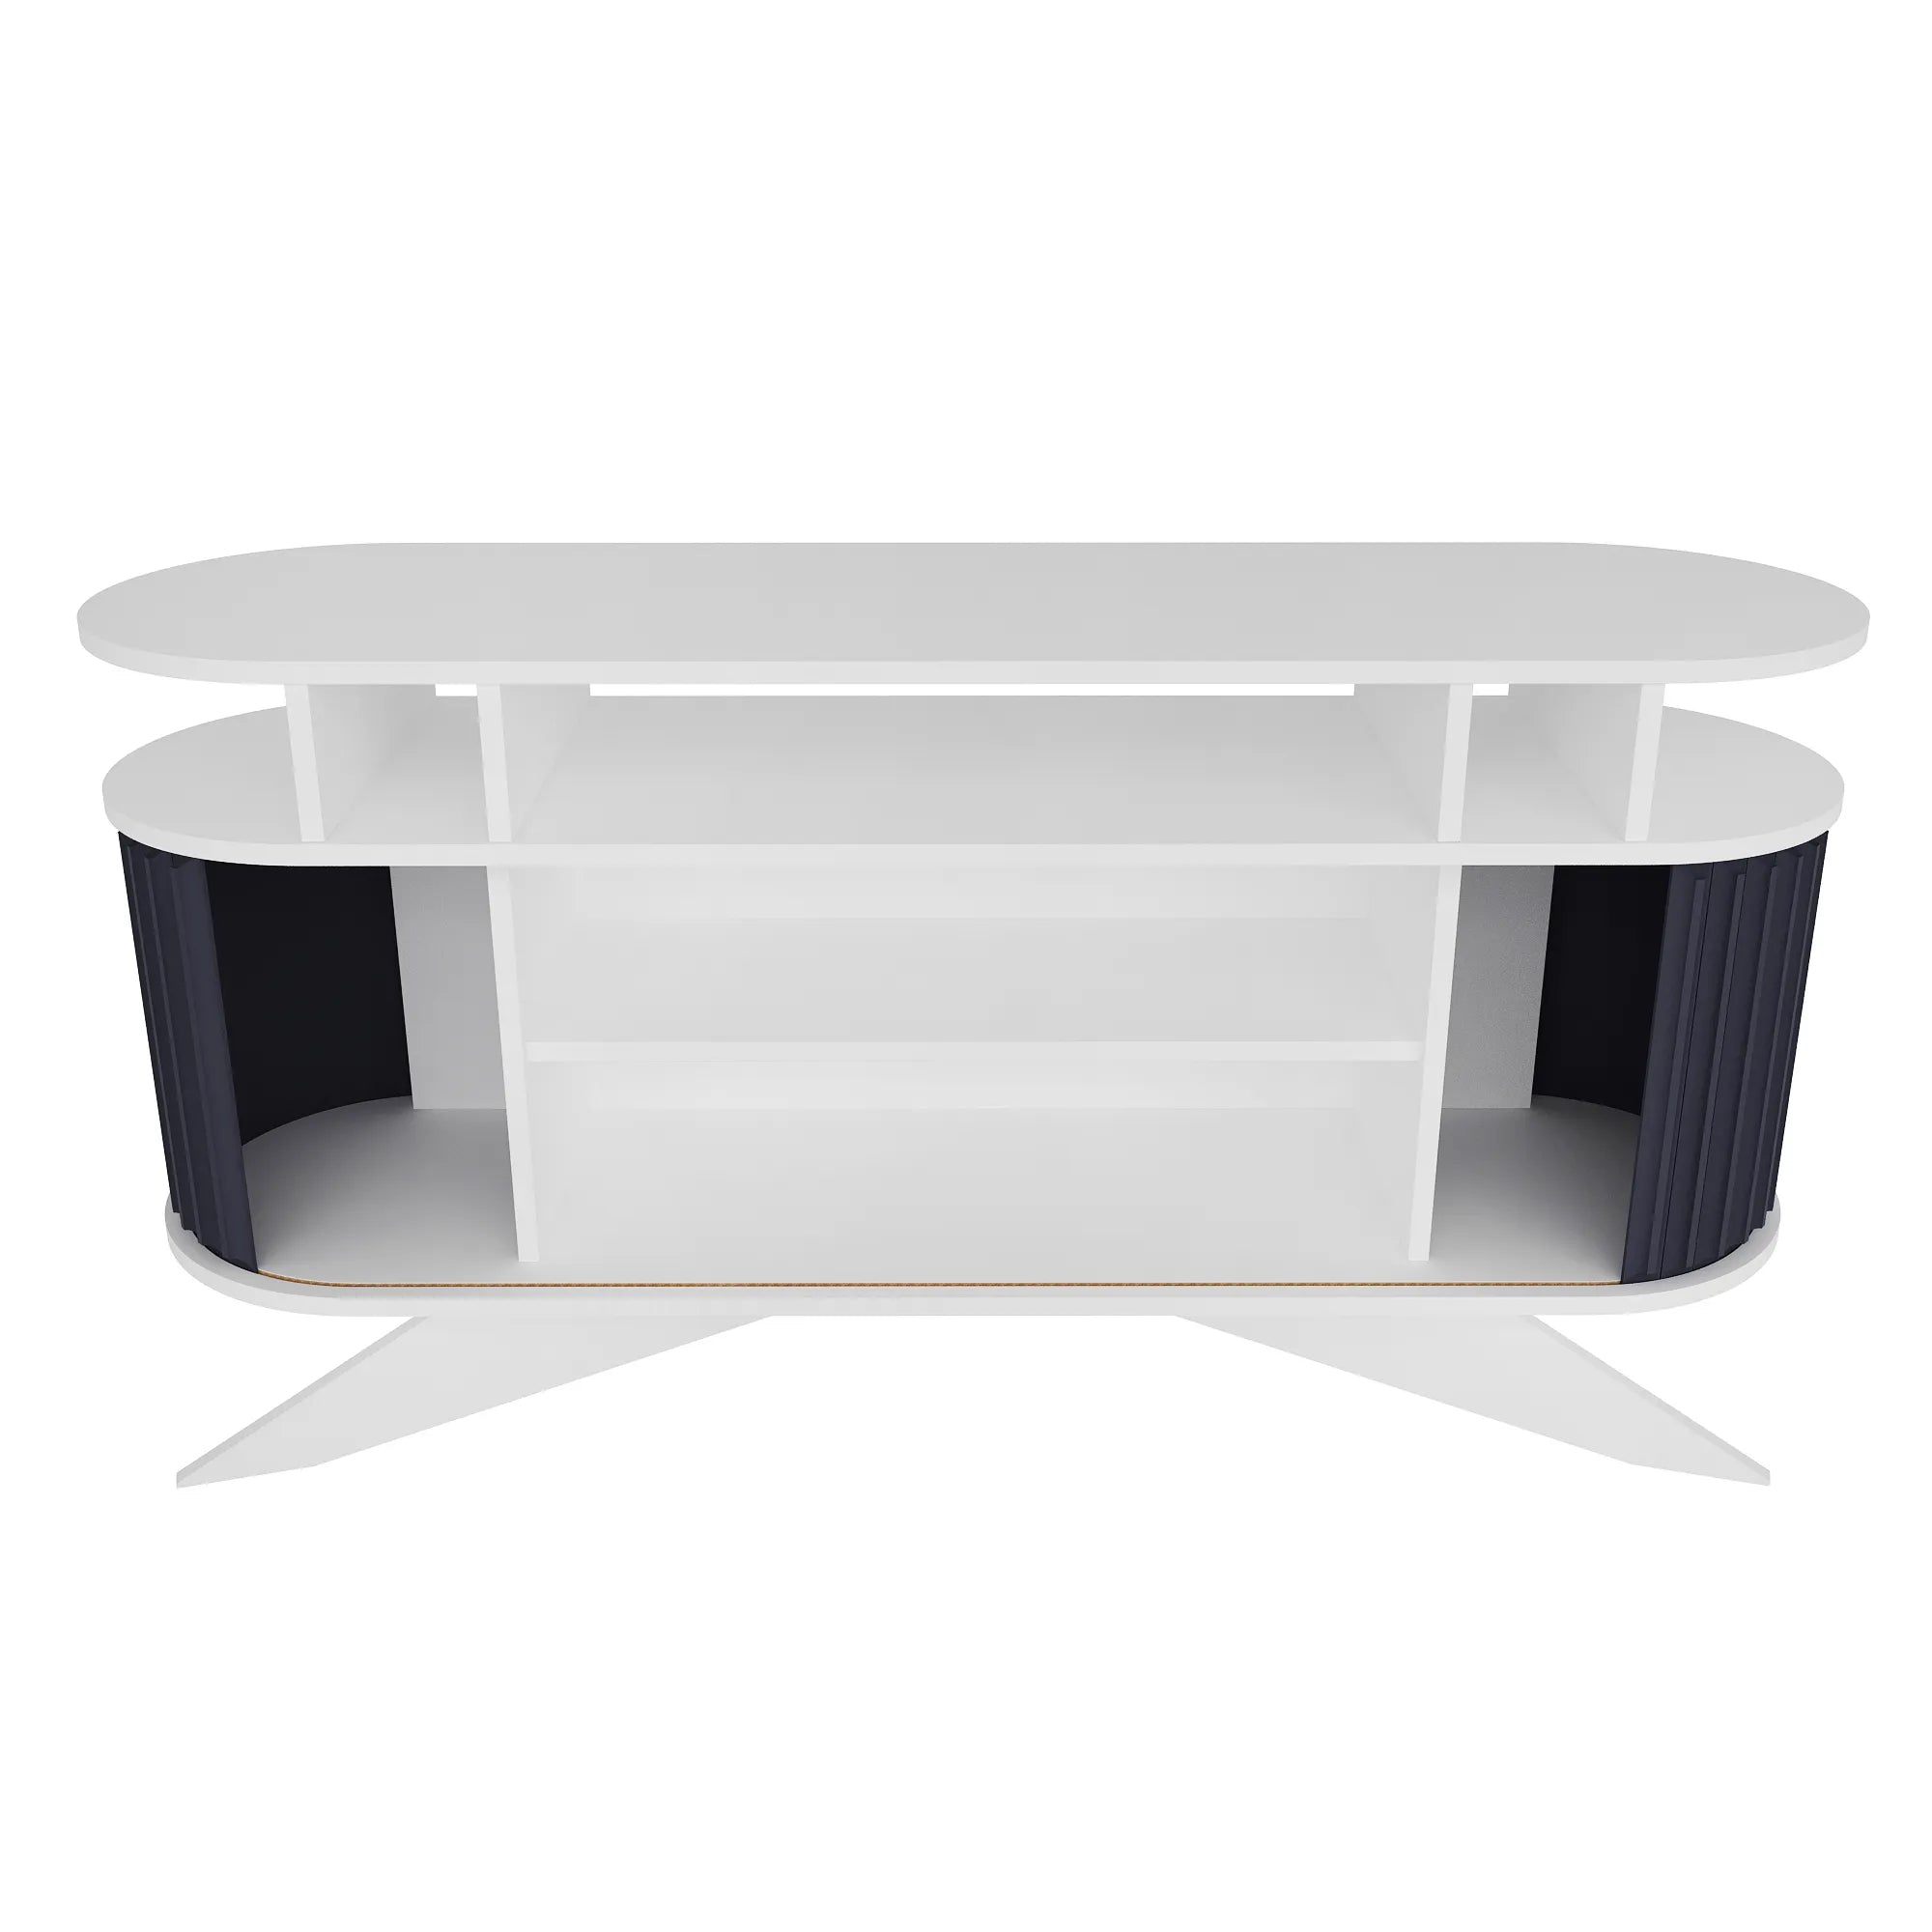 Store 59" Wide Oval Console | Modern TV Stand & Storage | Accommodates up to 68" TVs